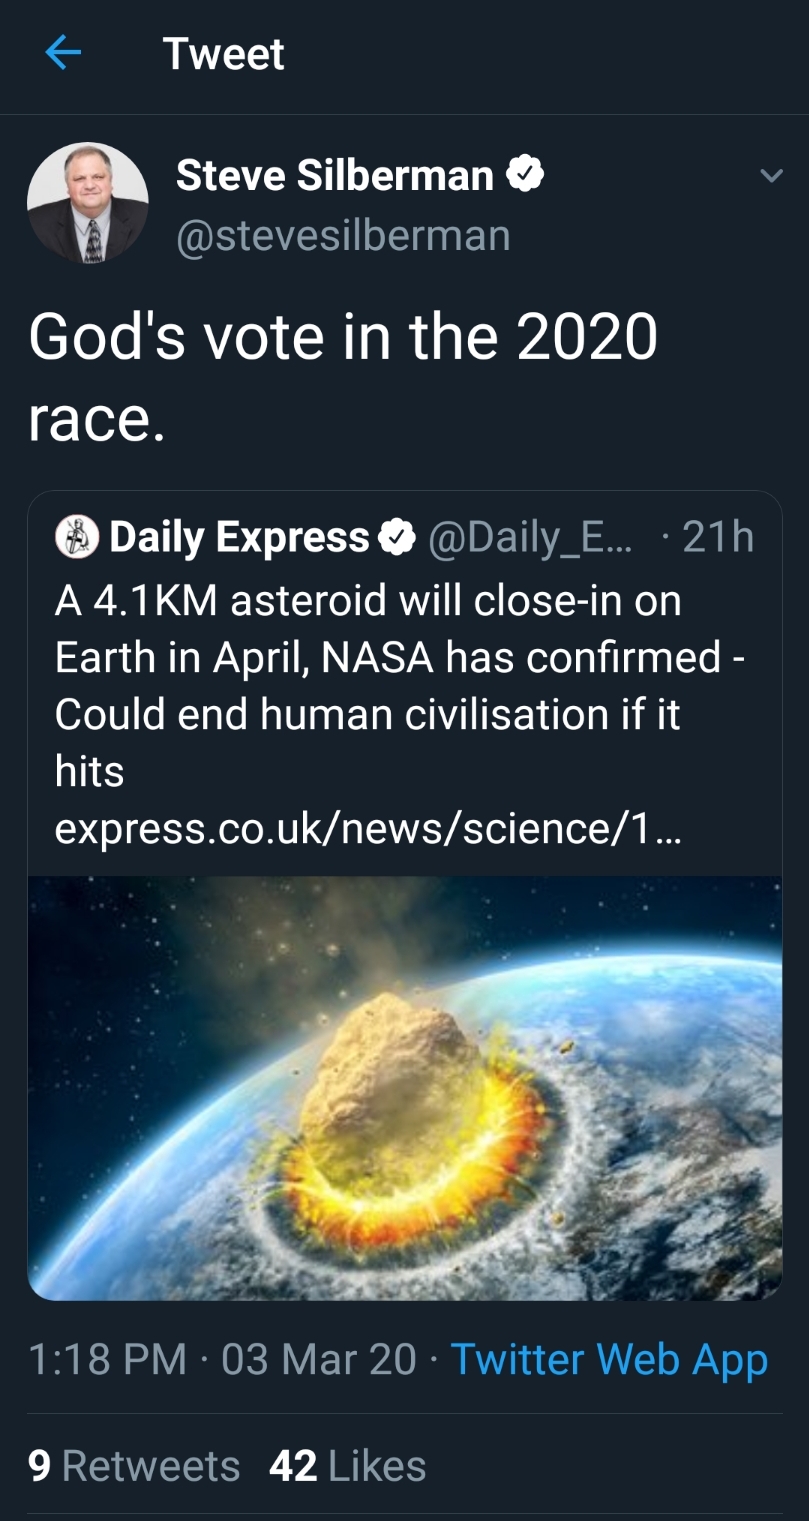 atmosphere - Tweet Steve Silberman God's vote in the 2020 race. Daily Express ... 21h A 4.1 Km asteroid will closein on Earth in April, Nasa has confirmed Could end human civilisation if it hits express.co.uknewsscience1... 03 Mar 20 Twitter Web App 9 42